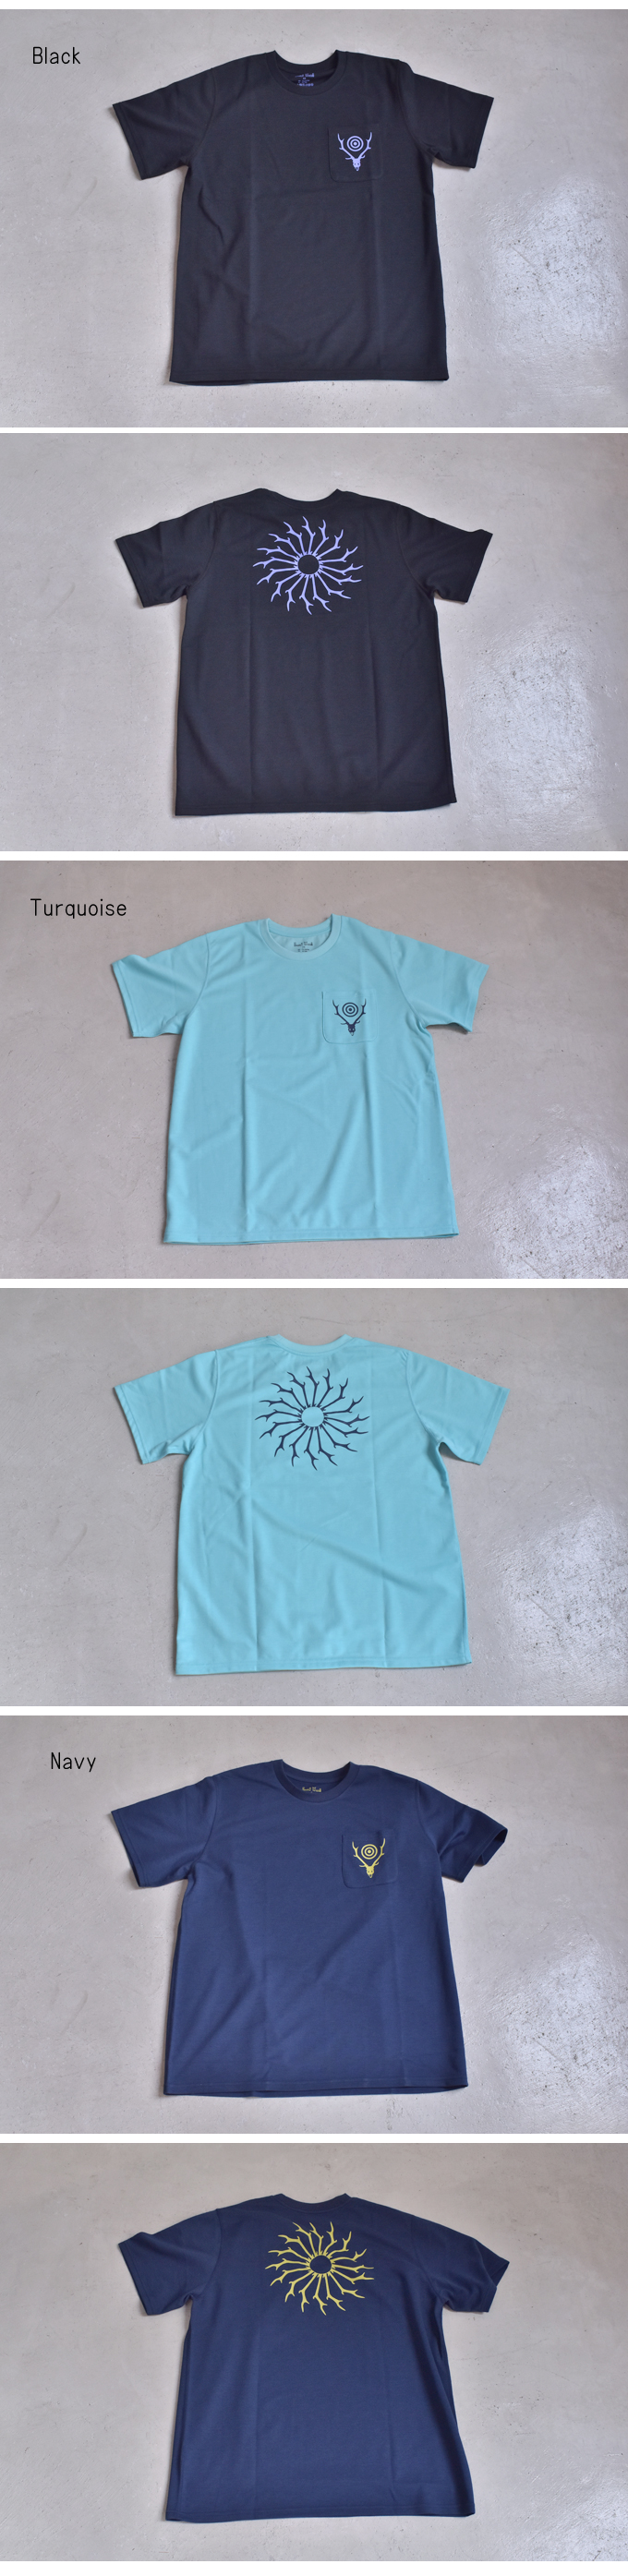 South2 West8 S/S ROUND POCKET TEE - CIRCLE HORN